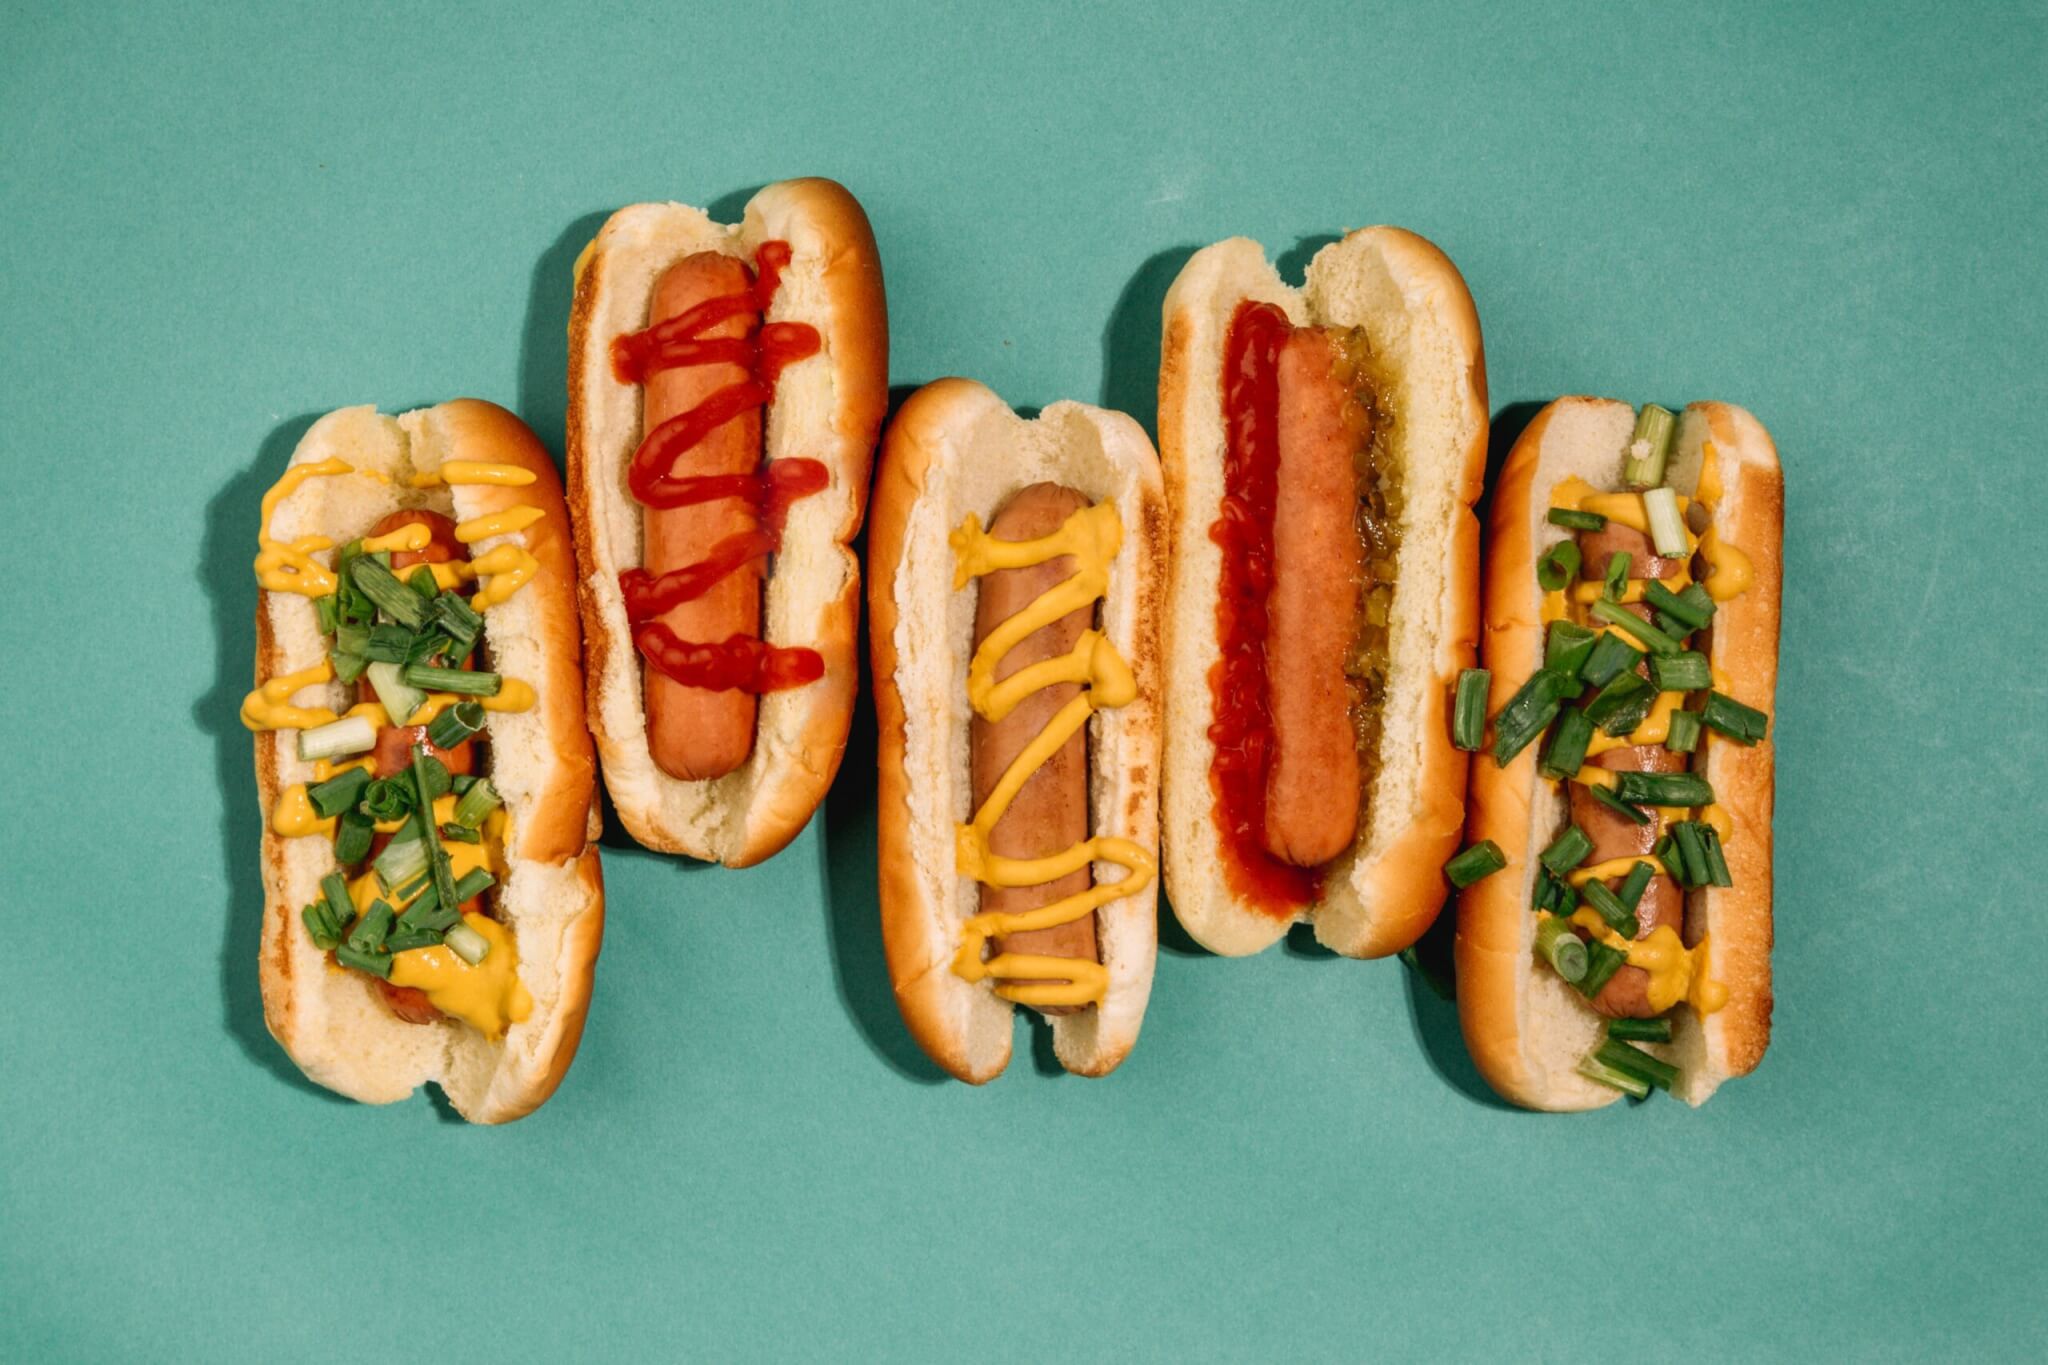 Eating One Hot Dog Can Take 36 Minutes Off of Your Life, According to New  Study